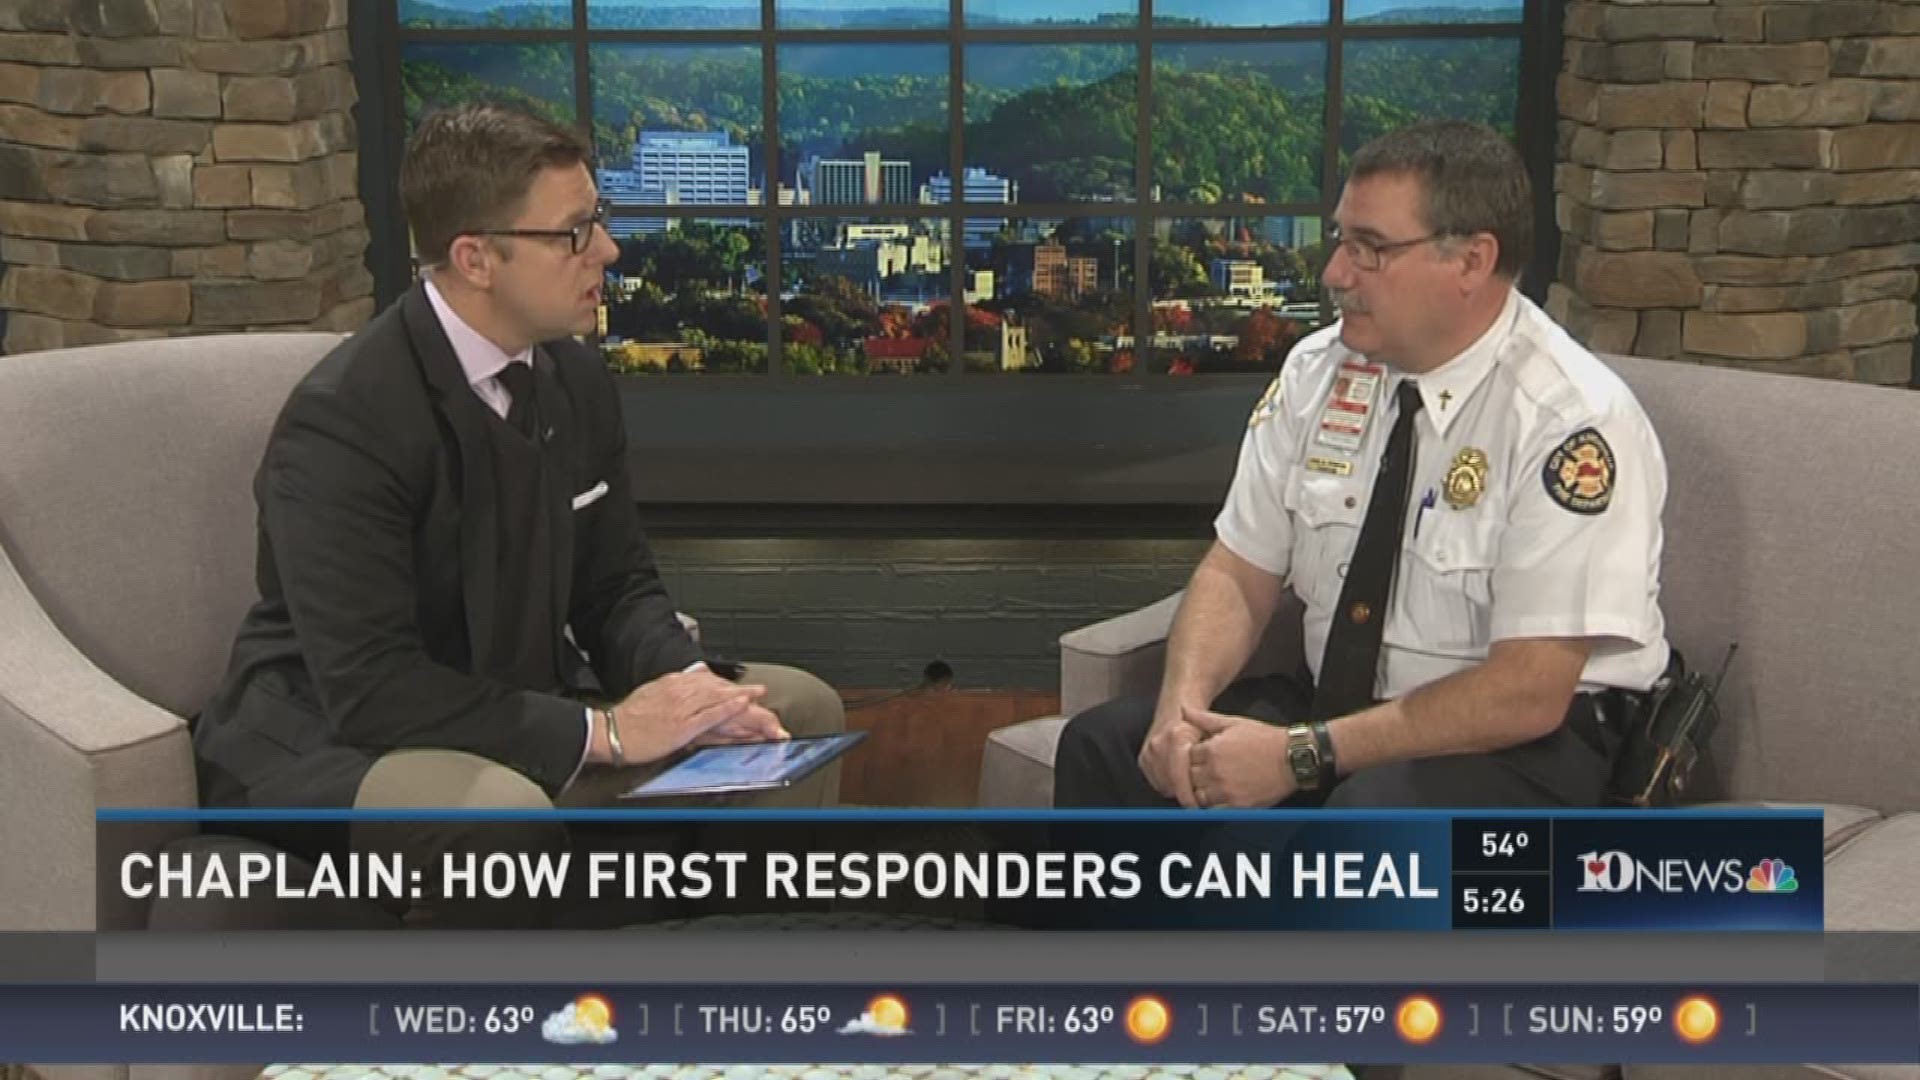 Nov. 22, 2016: Knoxville Fire Department Chaplain Paul Trumpore talks about how children, families and first responders can grieve and process their feelings after a tragedy.